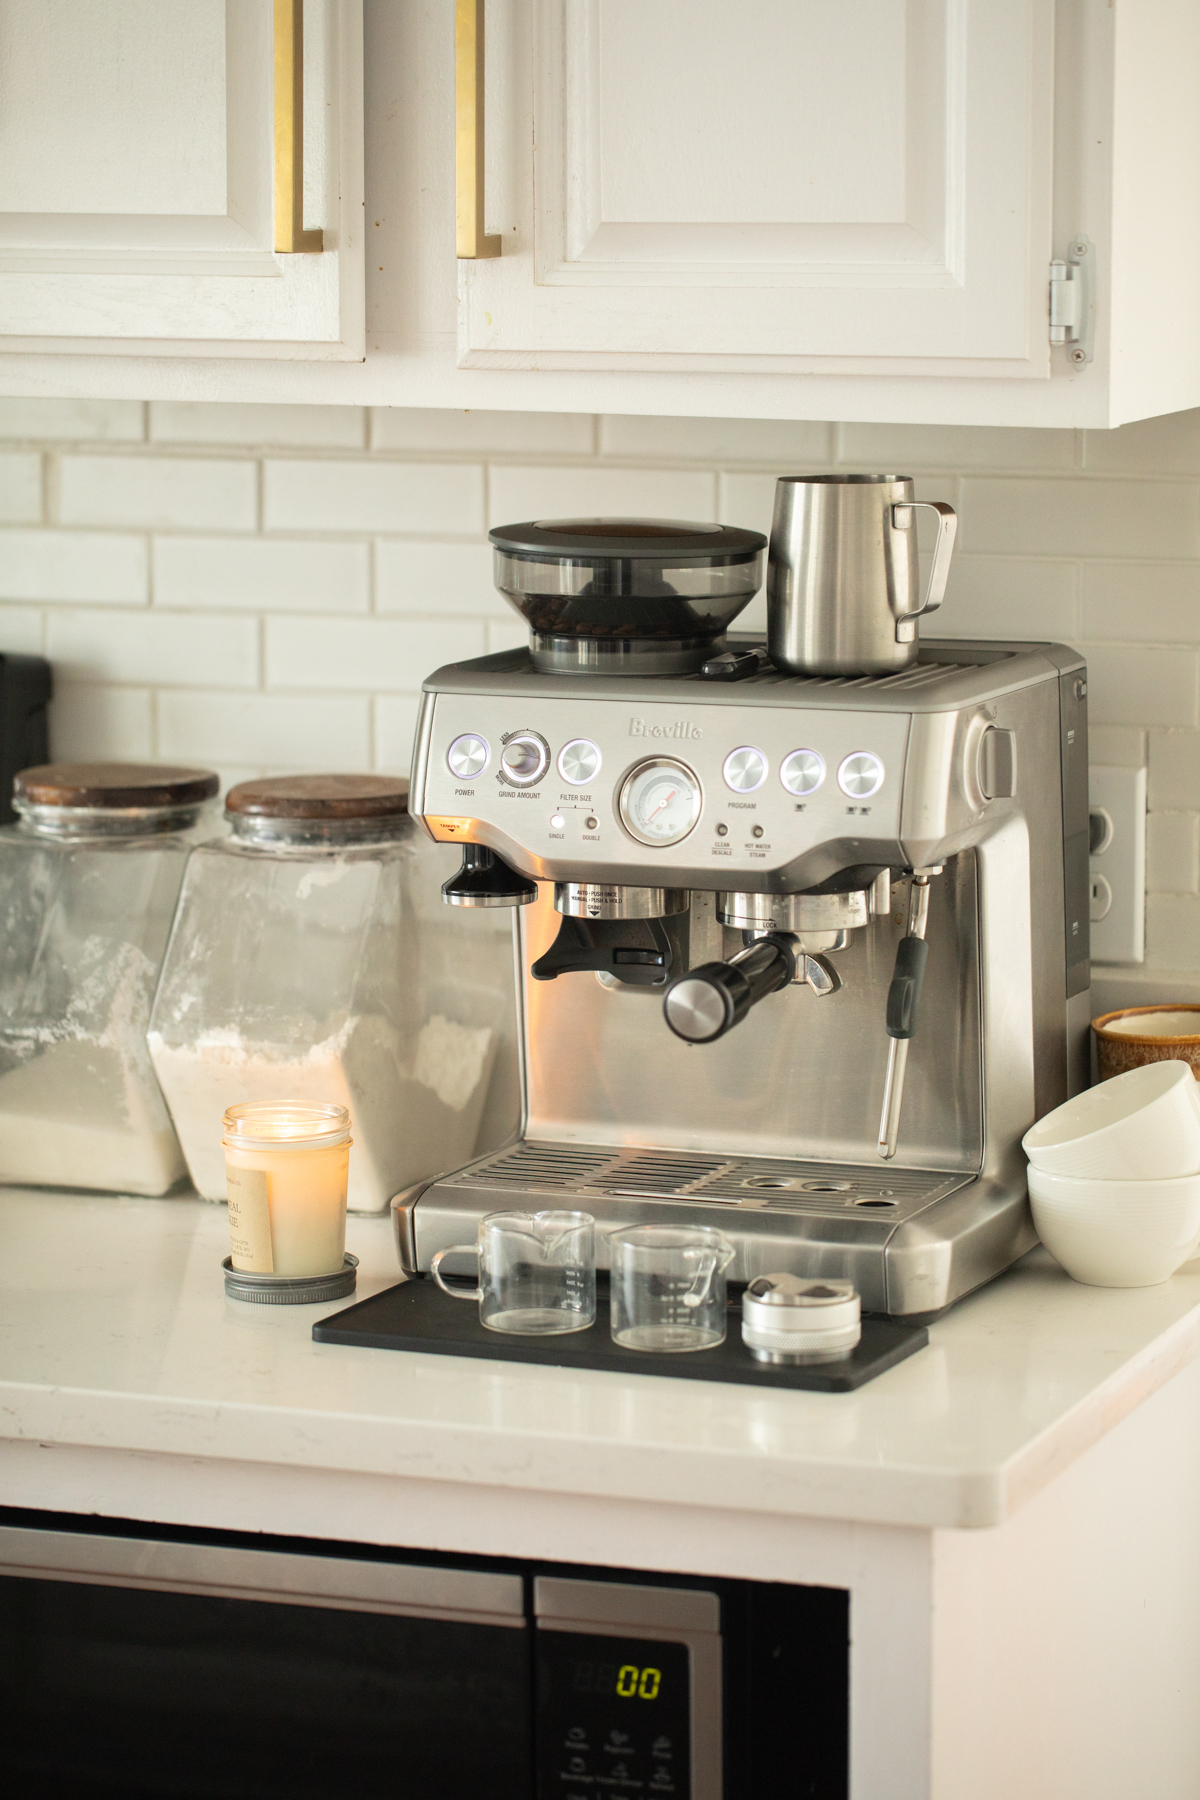 How to Use the Breville Barista Express to Make a Latte